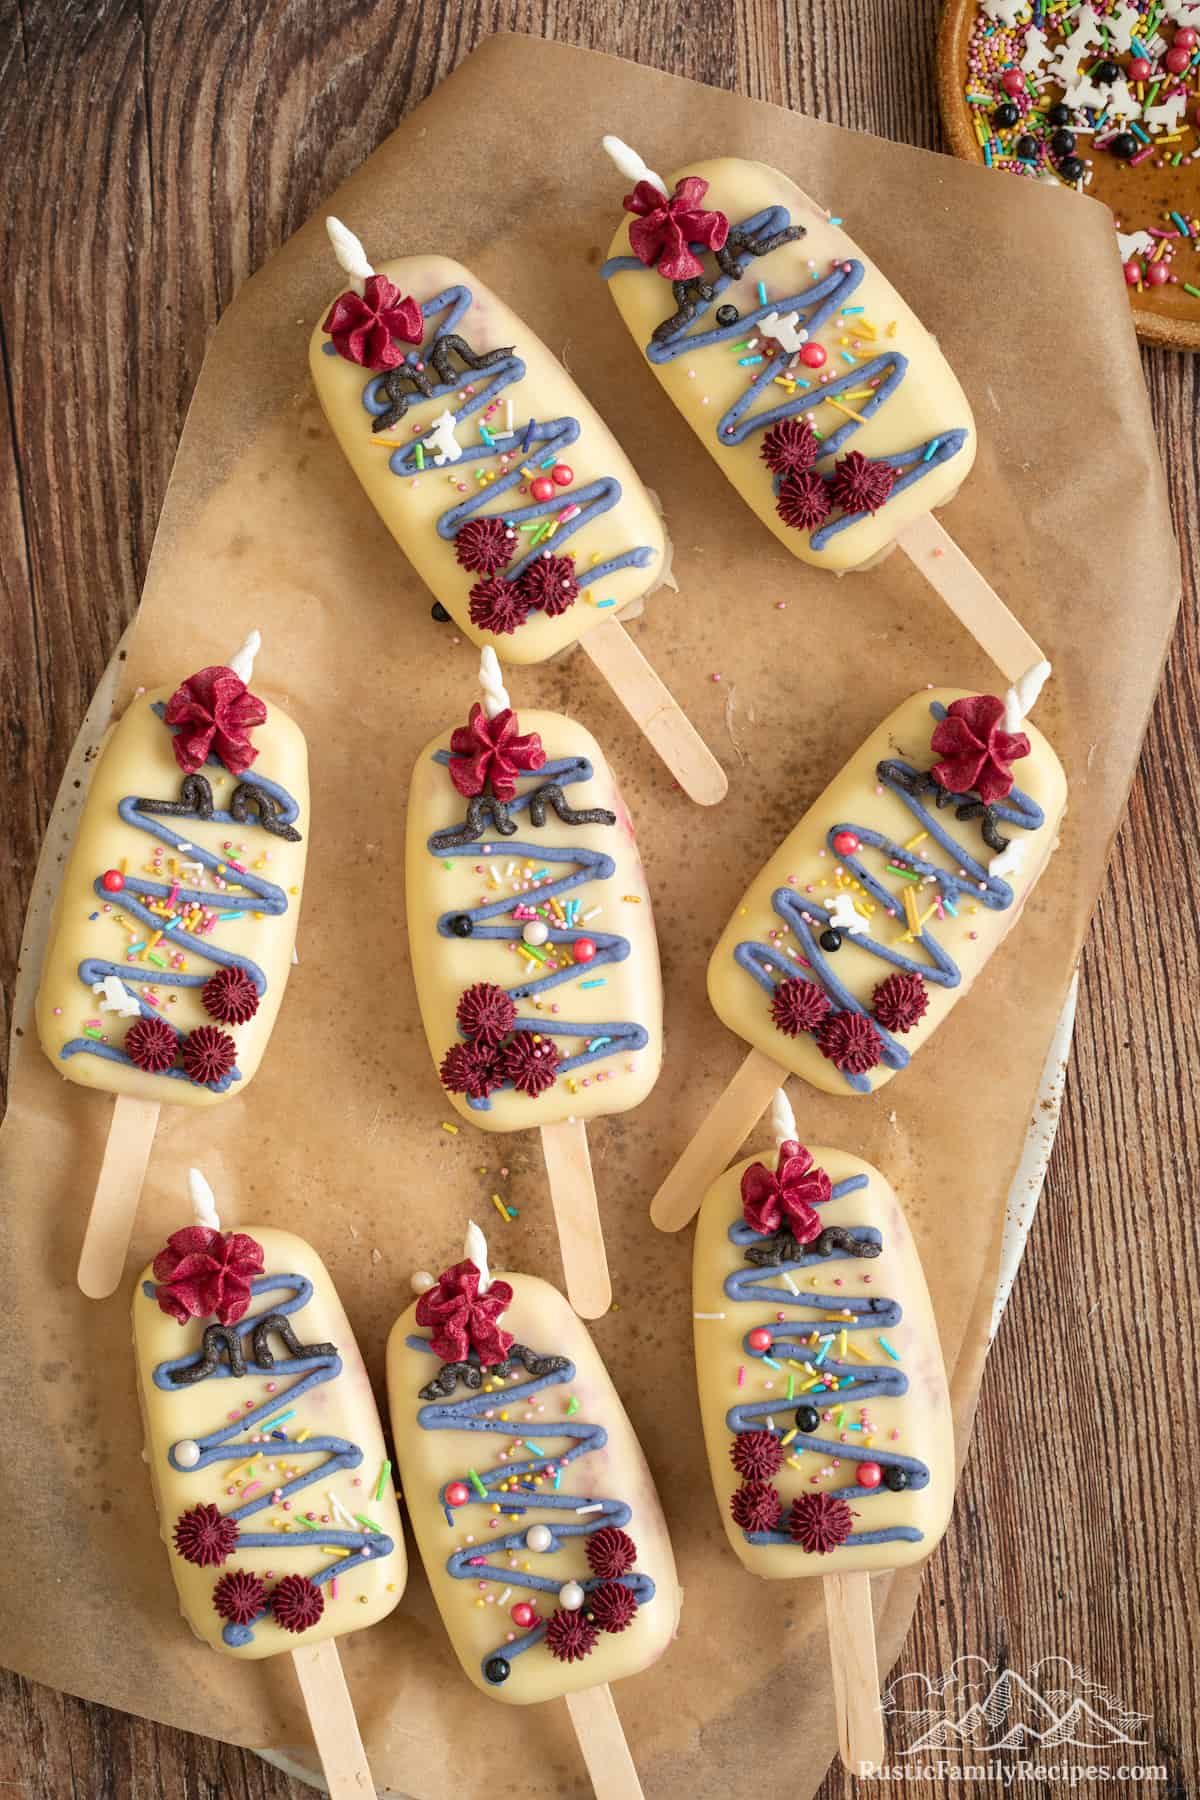 Decorated unicorn cakesicles on parchment paper.